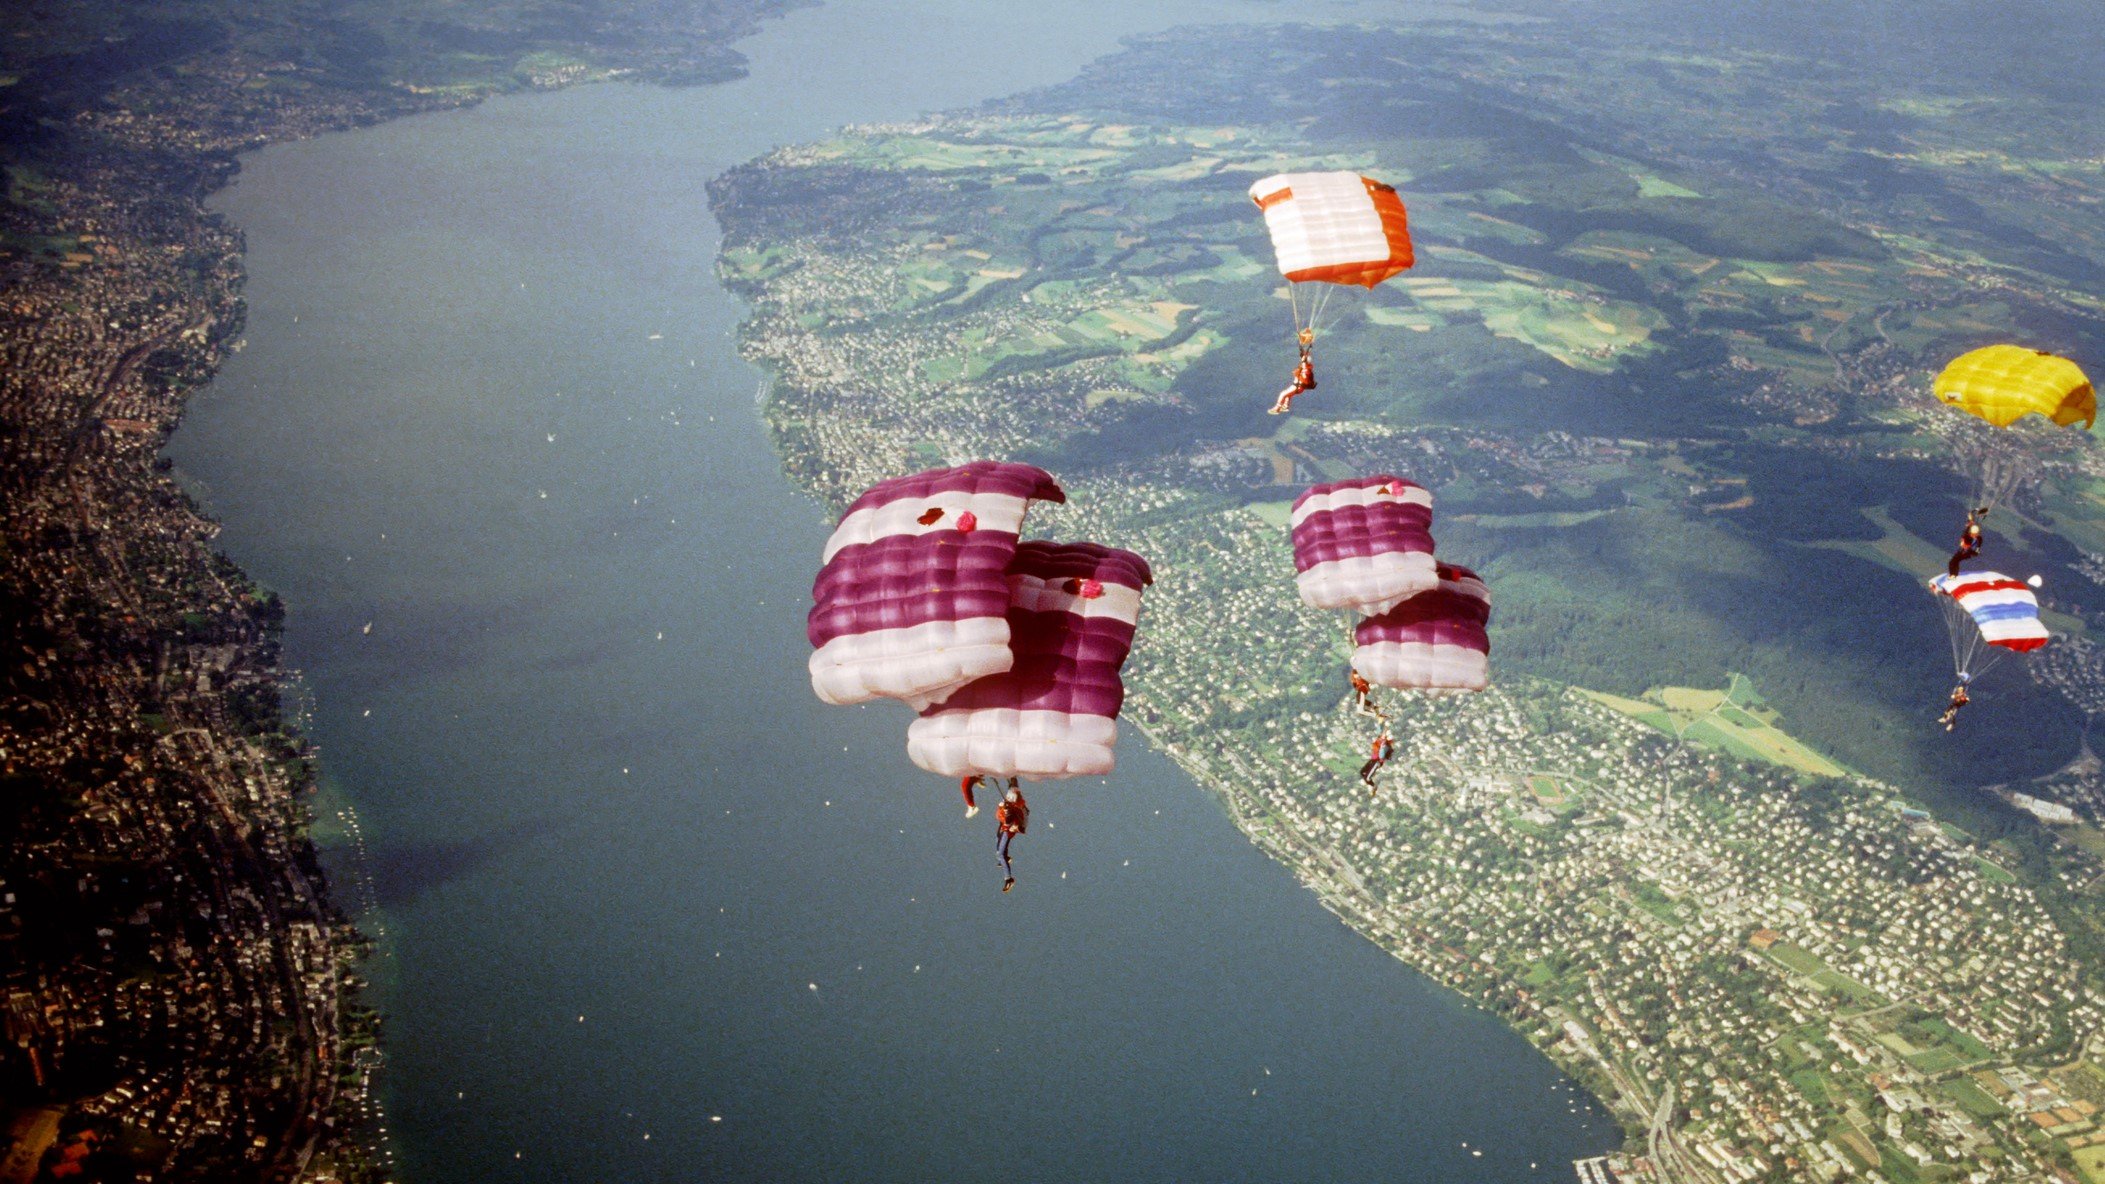 photo of parachutes over a river